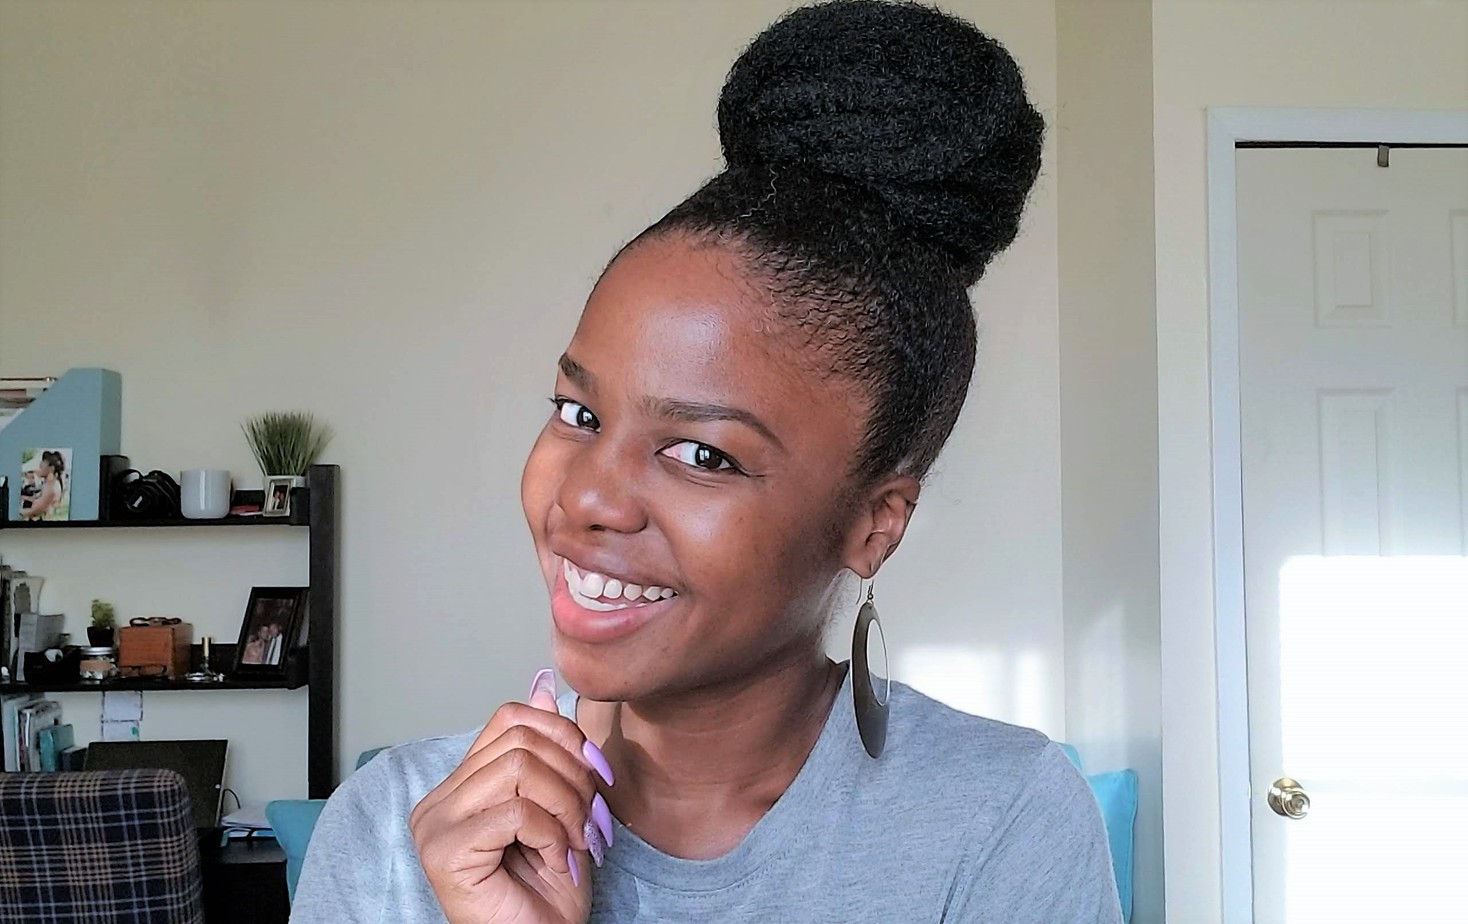 3 Easy Natural Hair Styles to Get You Out the Door Fast